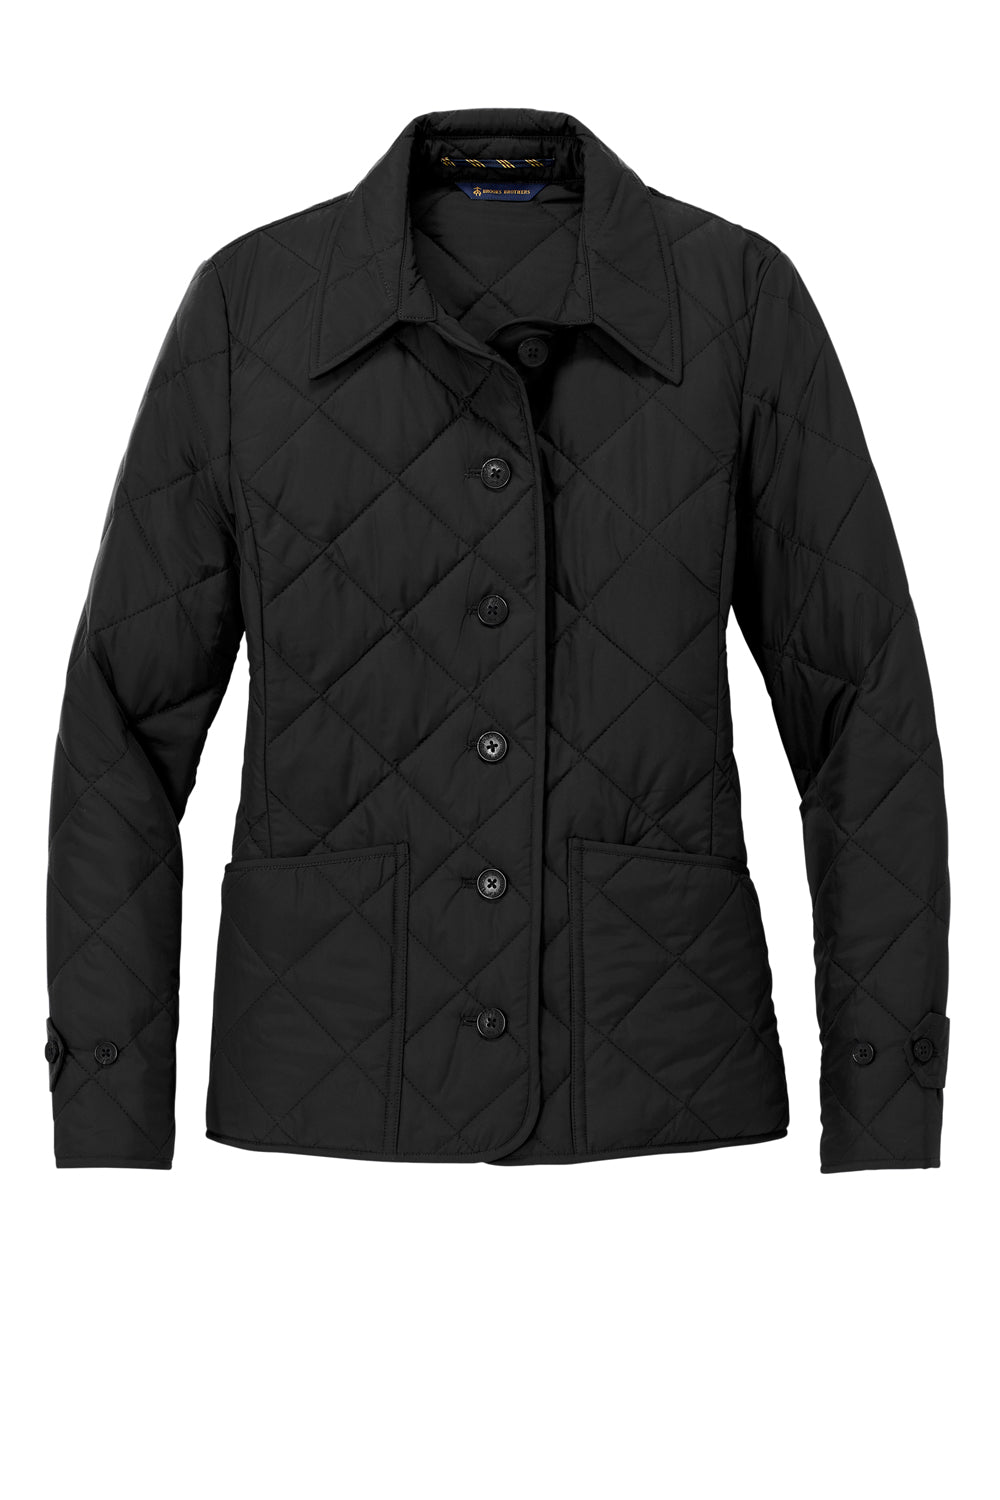 Brooks Brothers Womens Water Resistant Quilted Full Zip Jacket Deep Black Flat Front